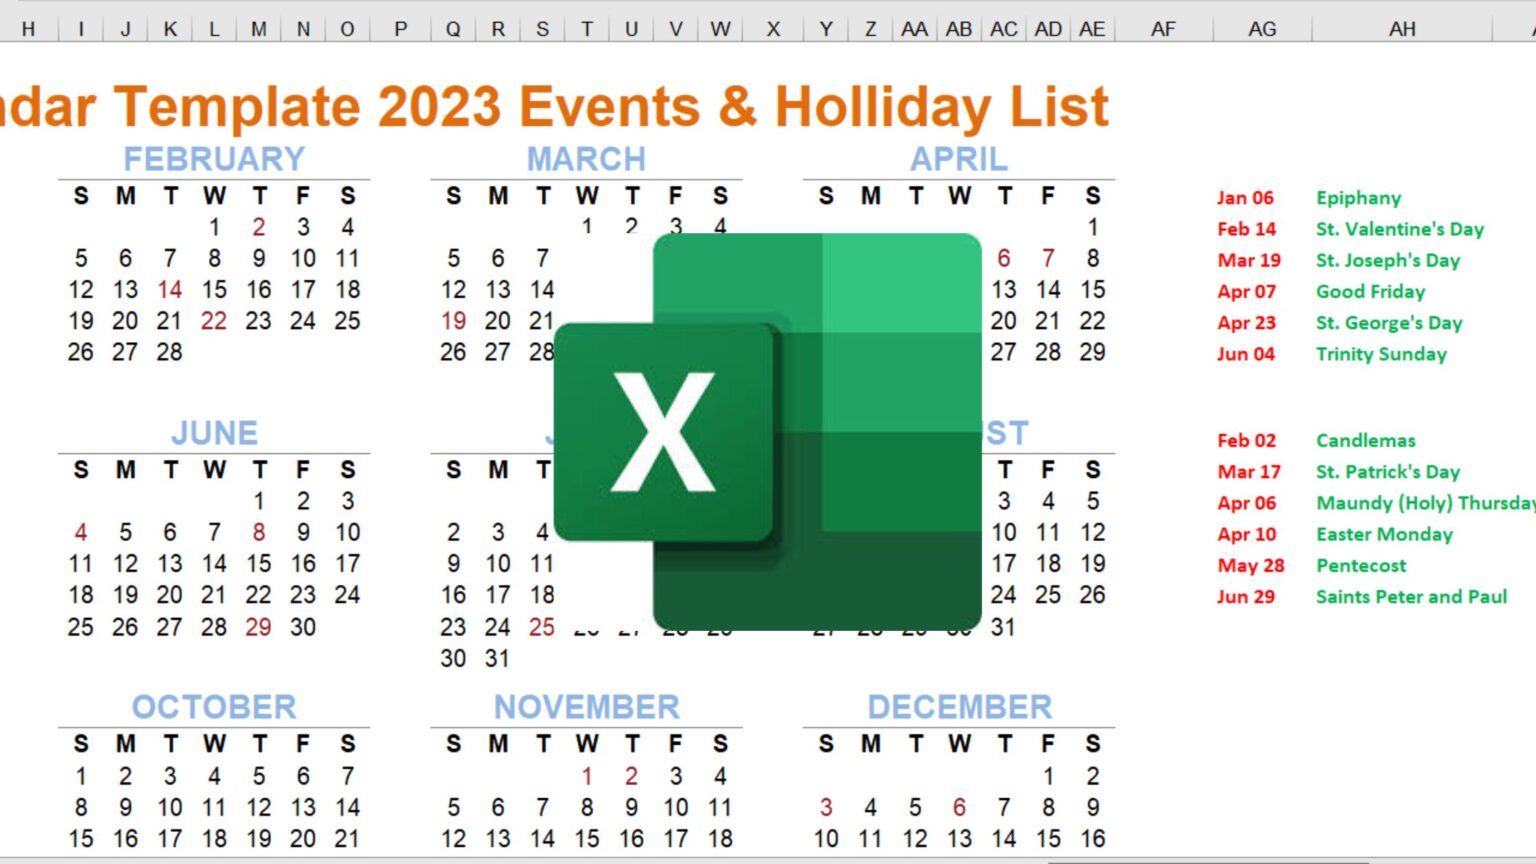 Download Printable Excel Calendar Template 2023 With Events & Holiday